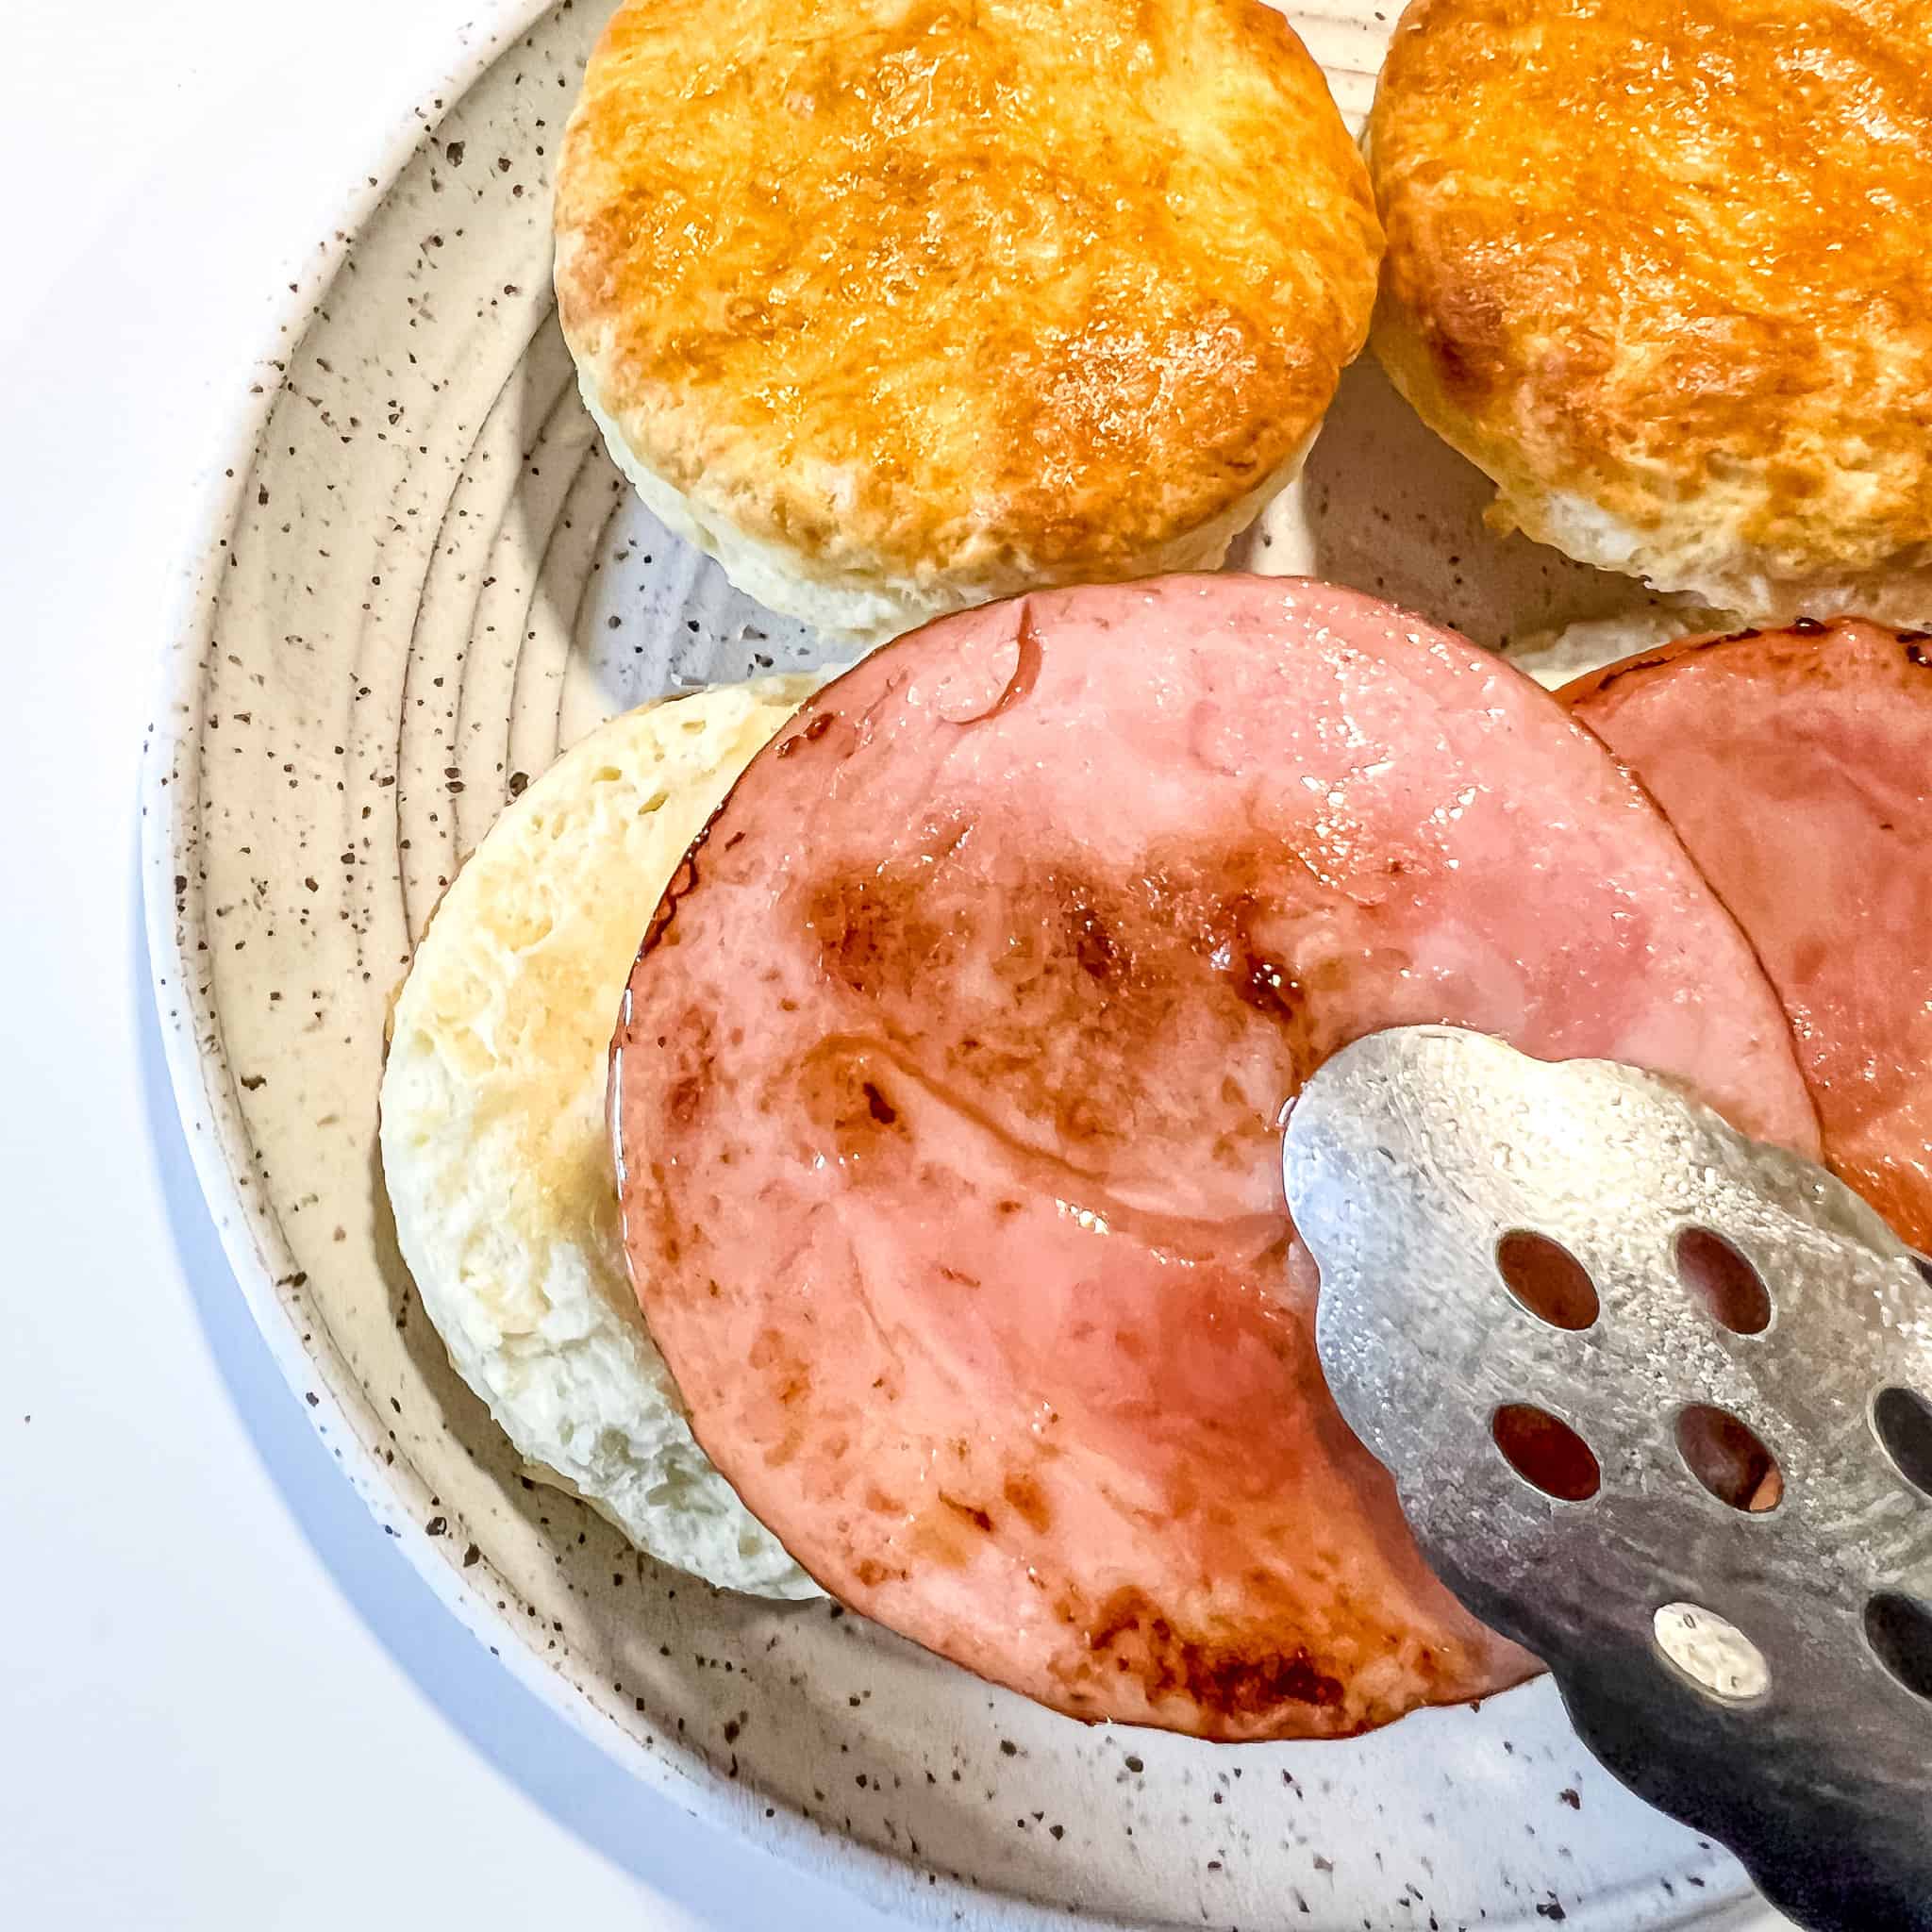 placing canadian bacon on a biscuit.